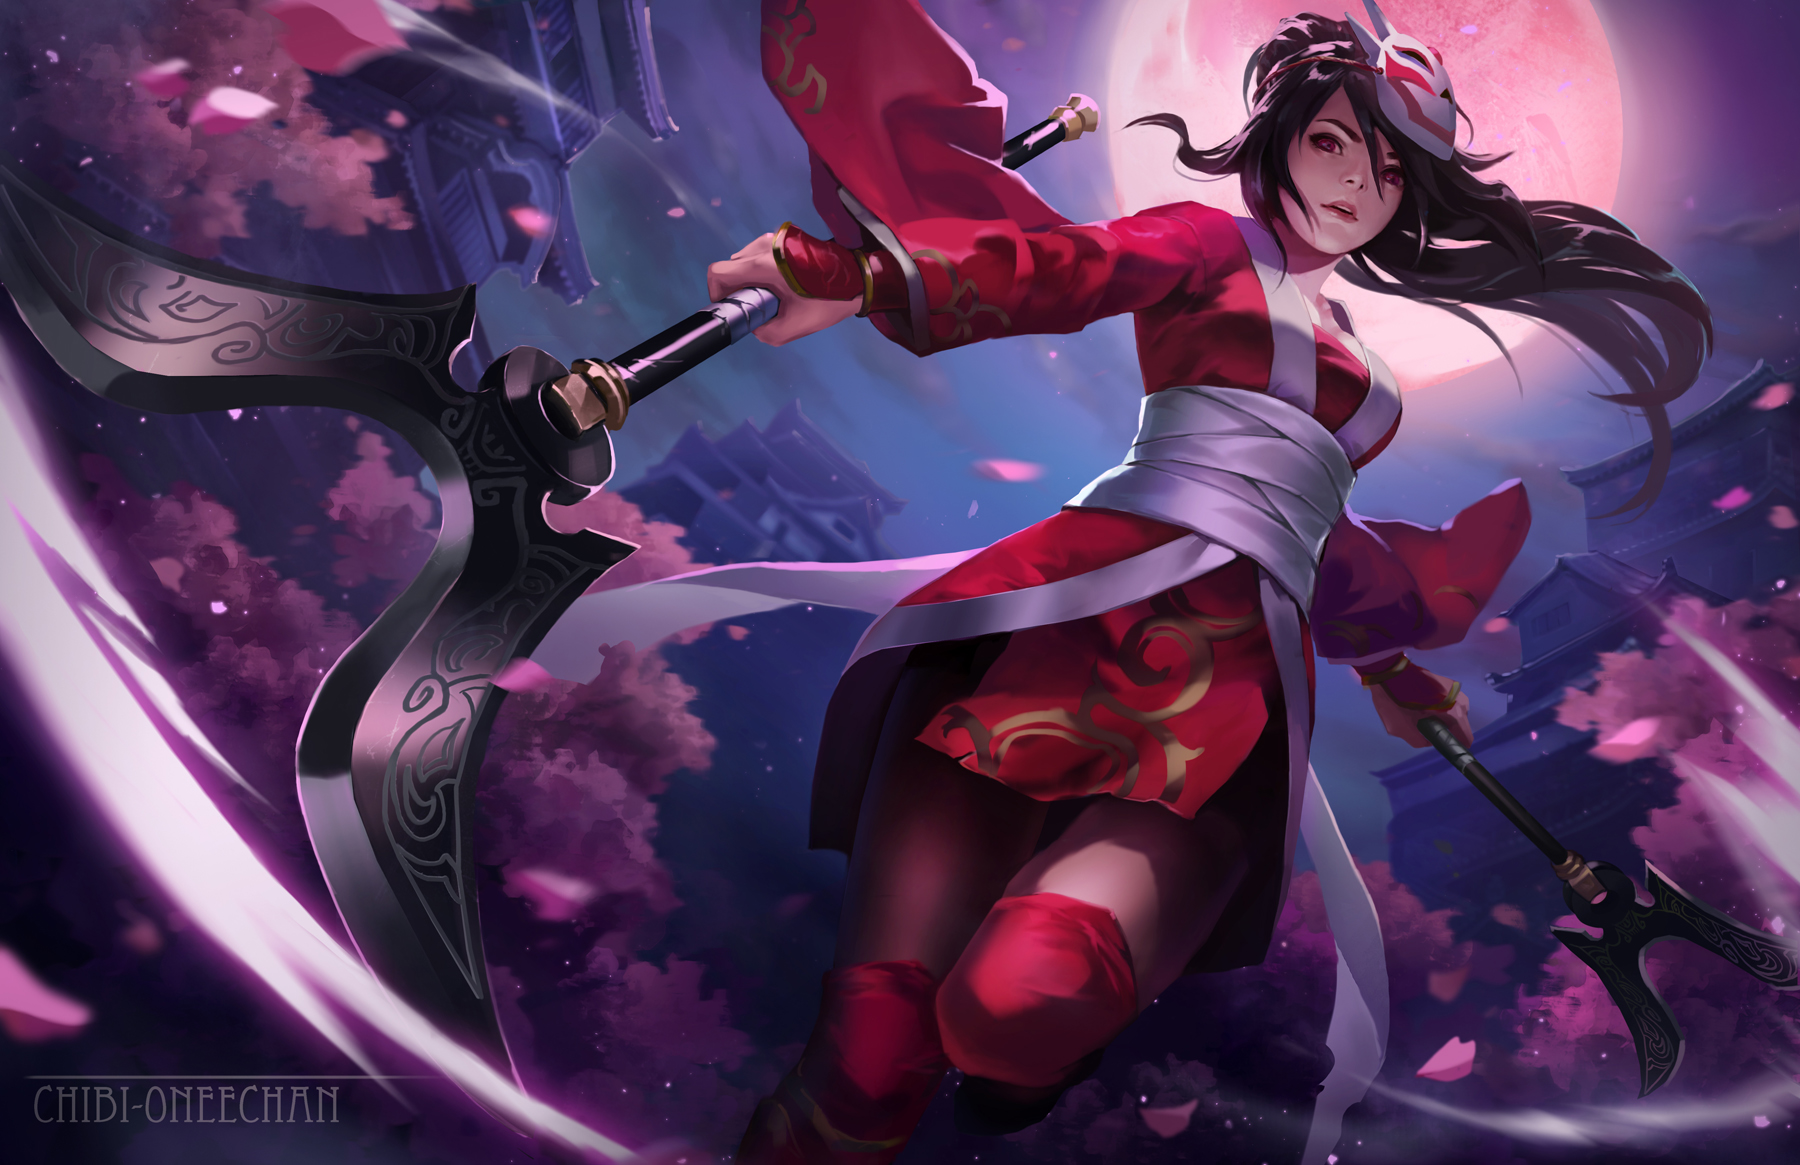 Anime 1800x1165 League of Legends Akali (League of Legends) Blood Moon (league of legends) kimono CHIBI-ONEECHAN Girl With Weapon dark hair long hair red clothing red eyes cherry blossom